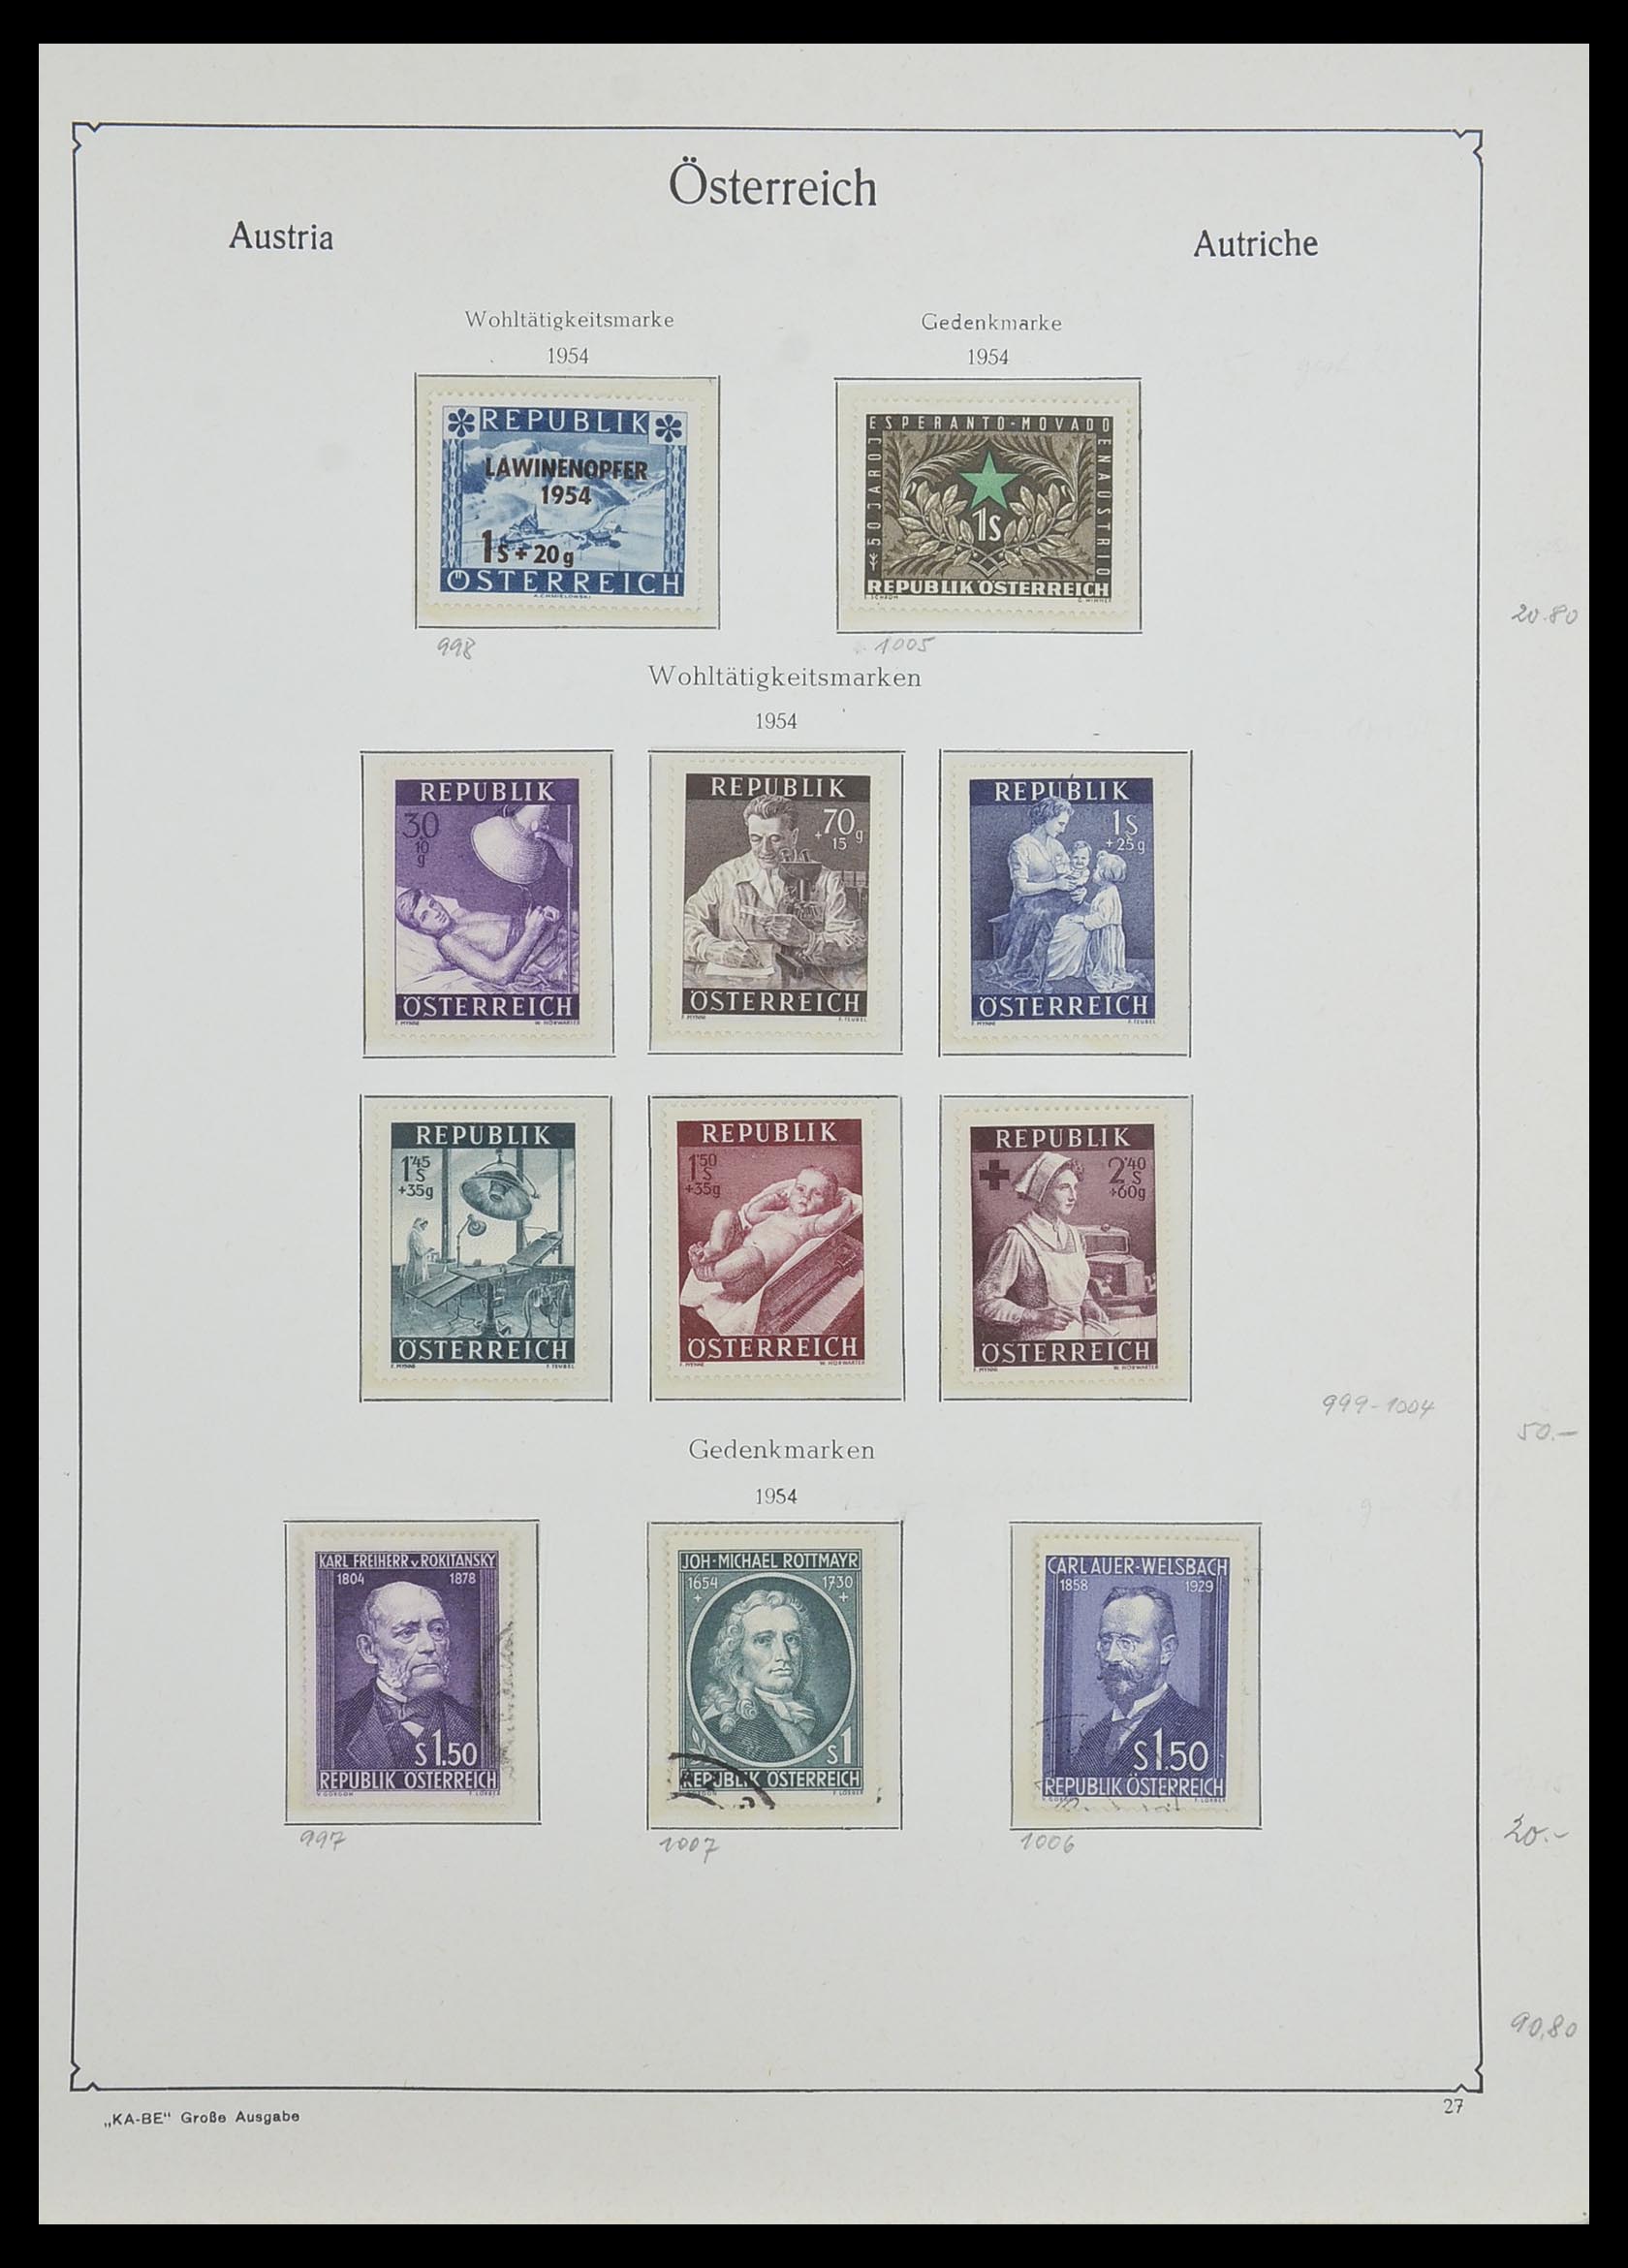 33593 068 - Stamp collection 33593 Austria and territories 1850-1959.